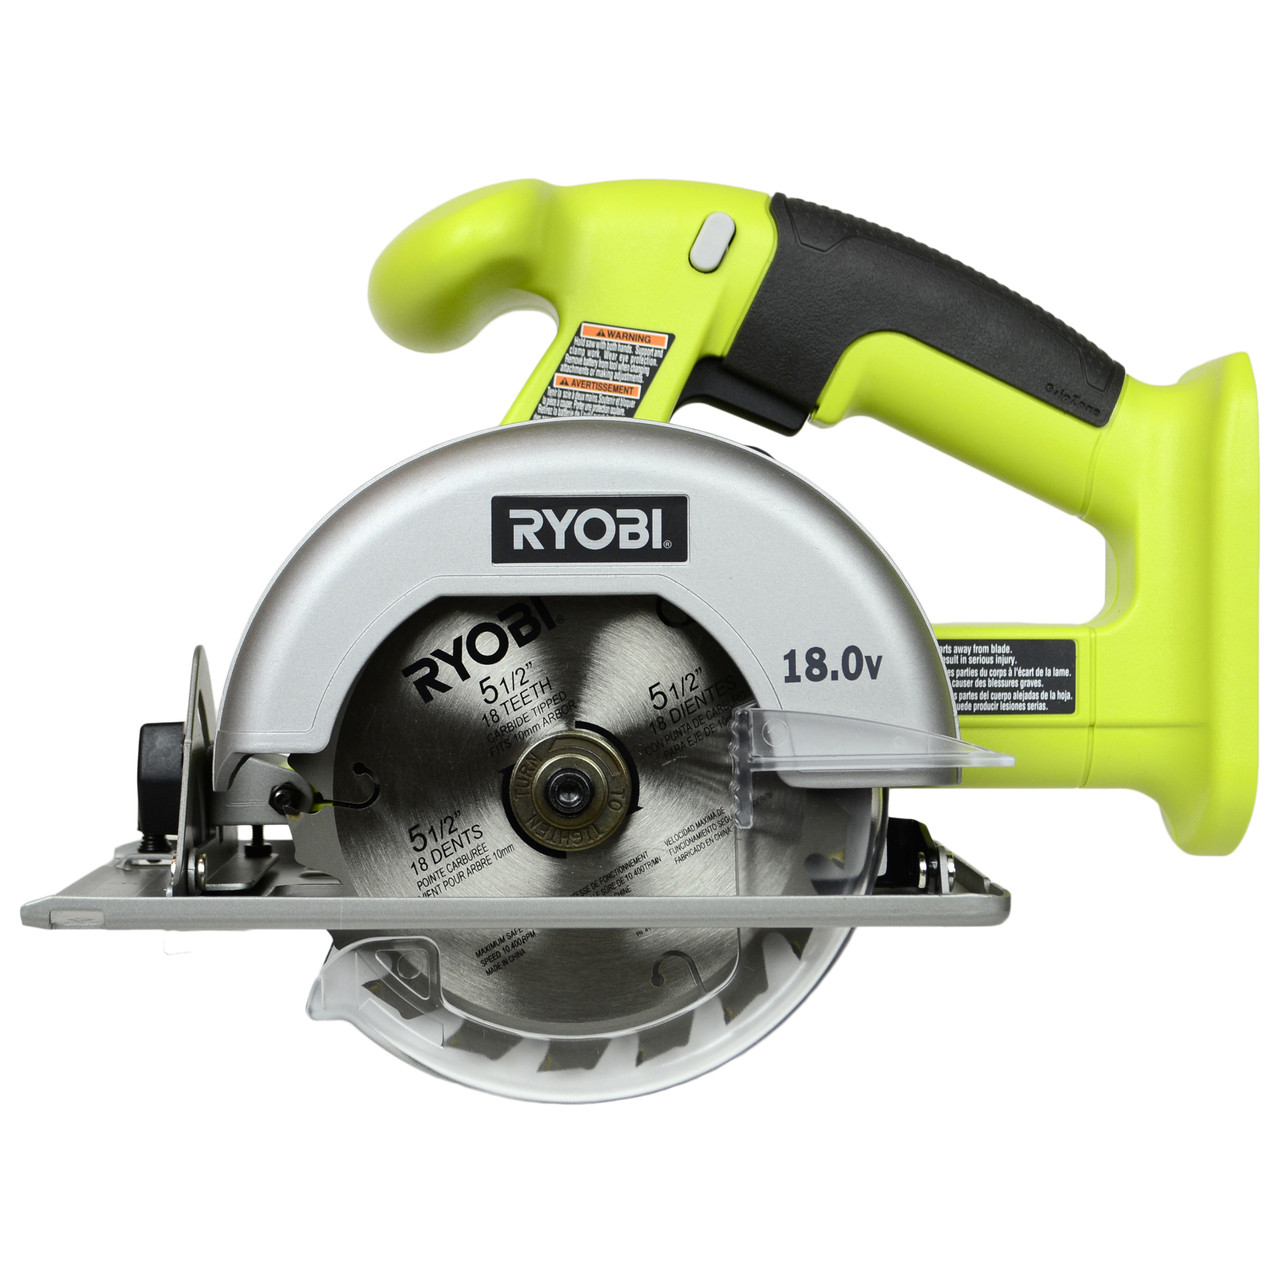 Ryobi 18 Volt Cordless Circular Saw, 1/2 in. Bare Tool, (No Retail  Packaging, Bulk Packaged) P505 電動工具